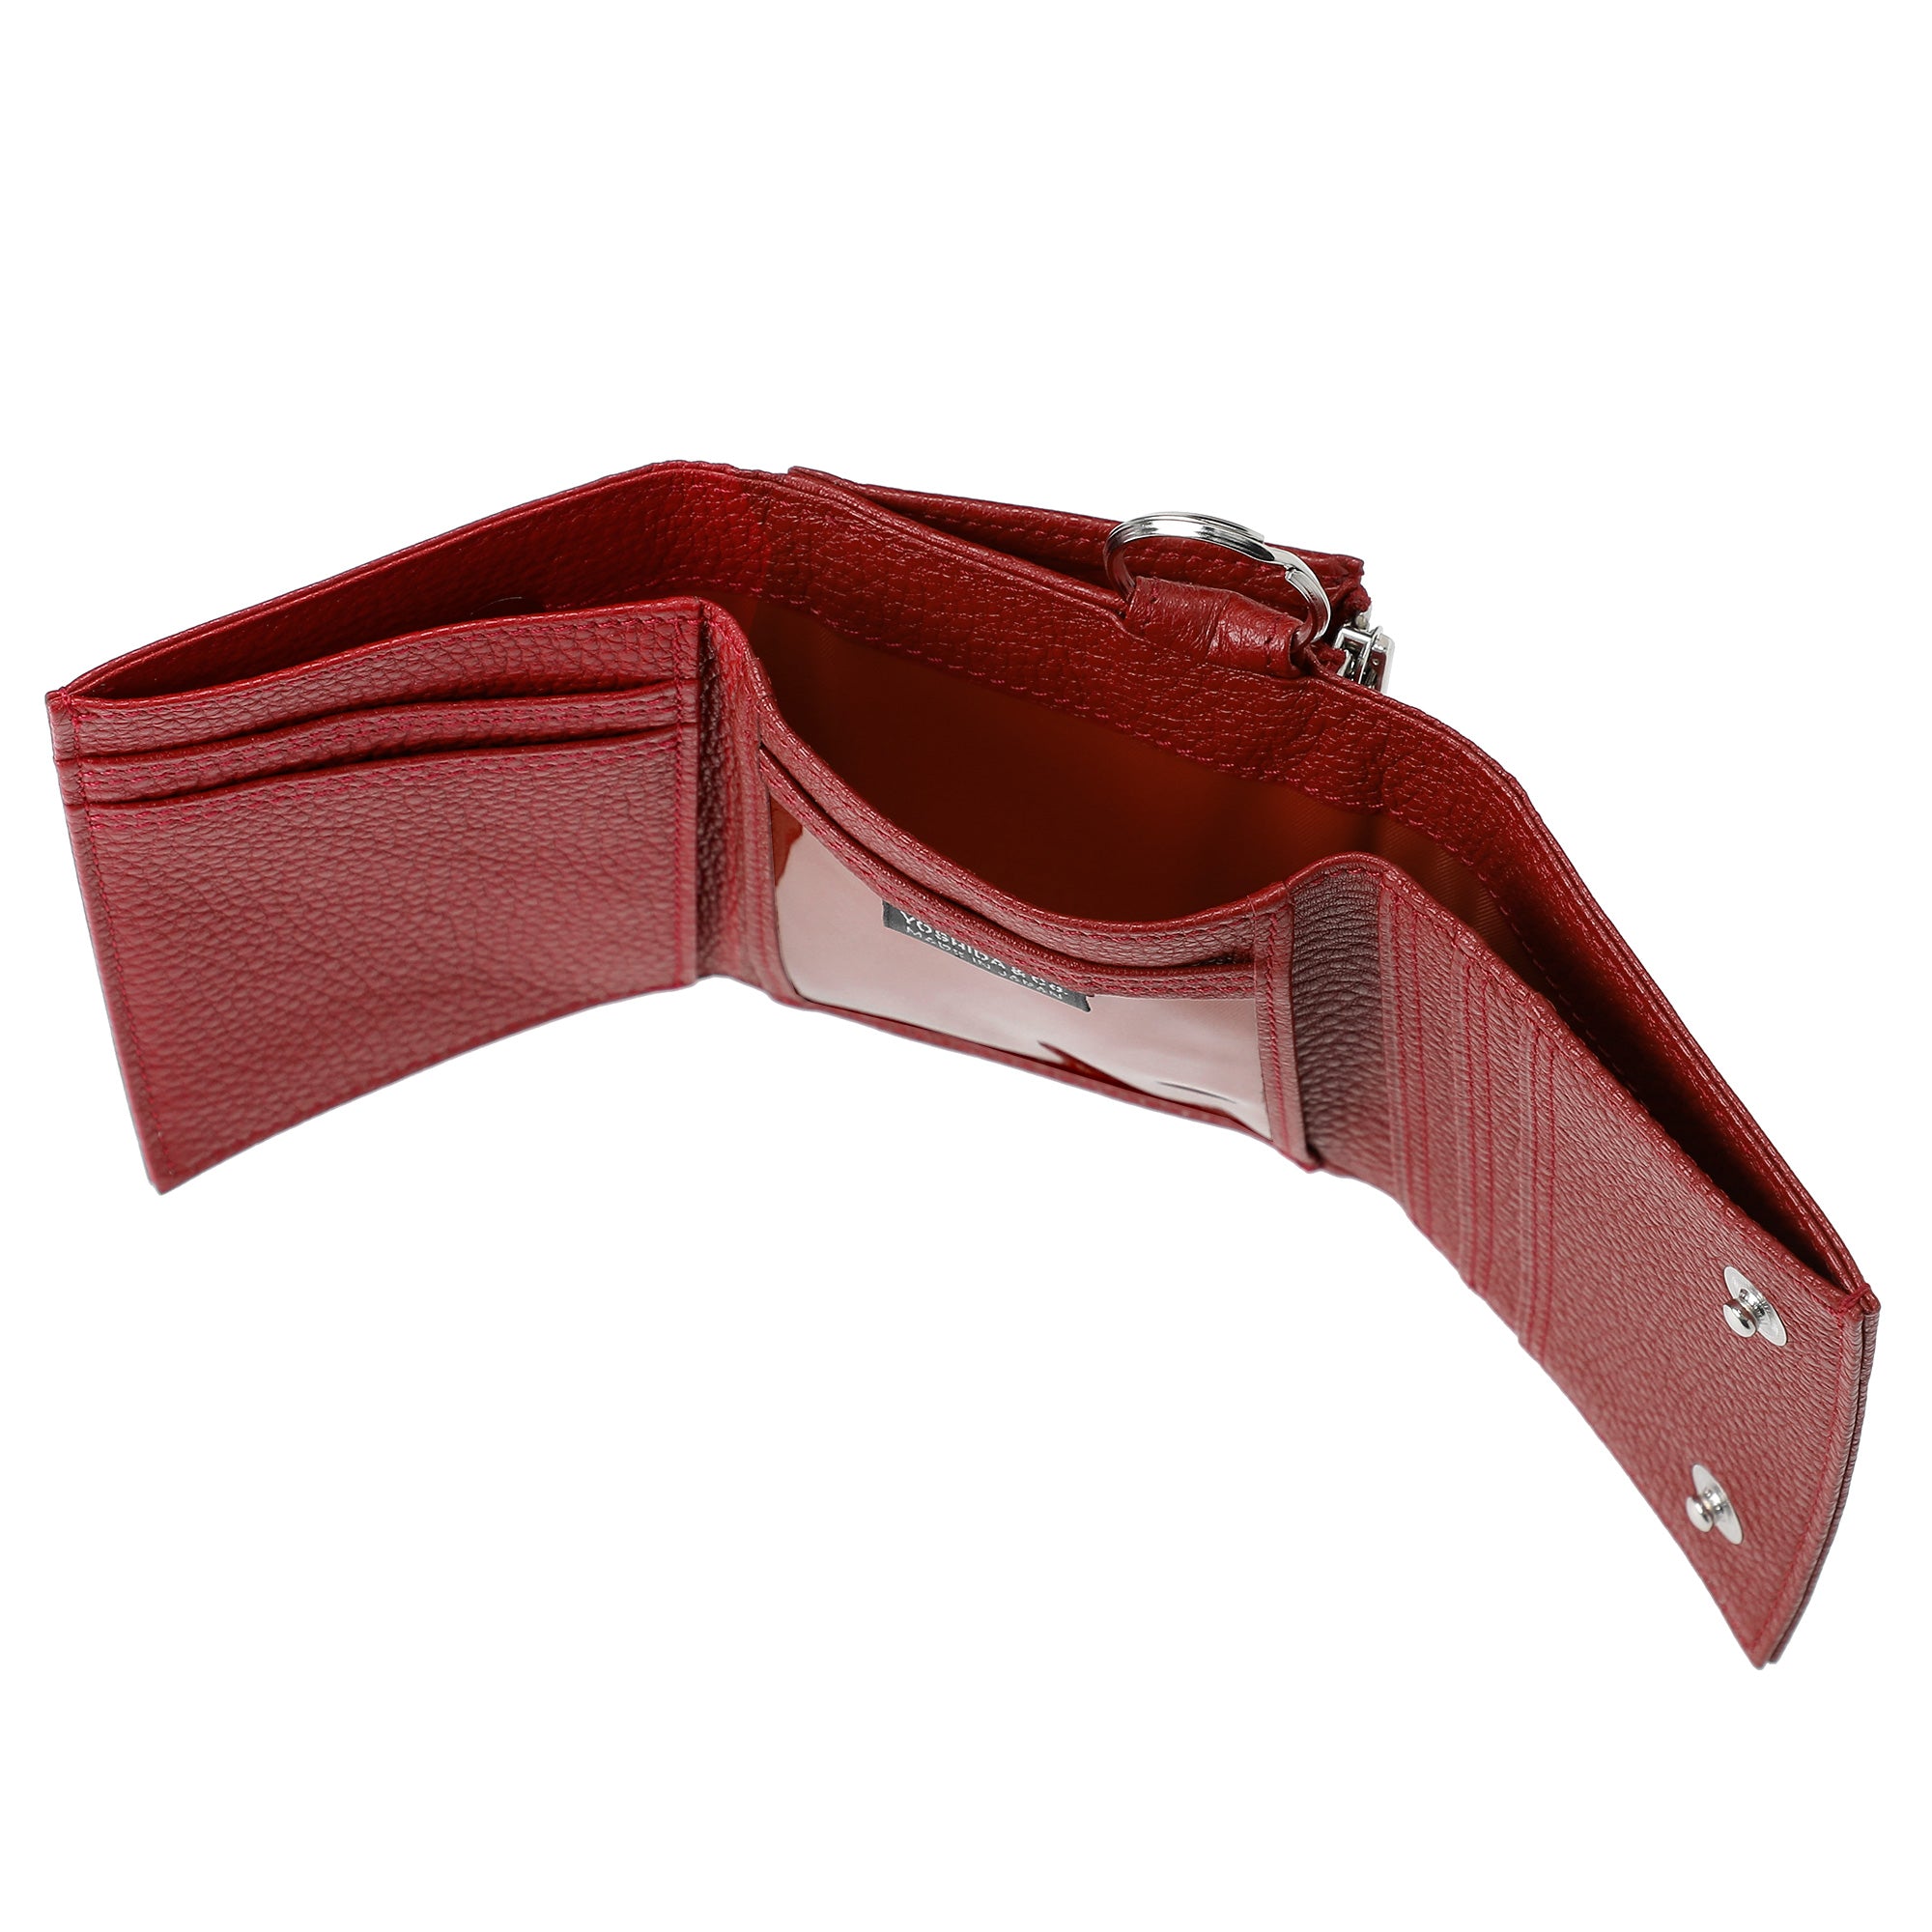 PORTER - Shrink Long Purse - (Red) view 4